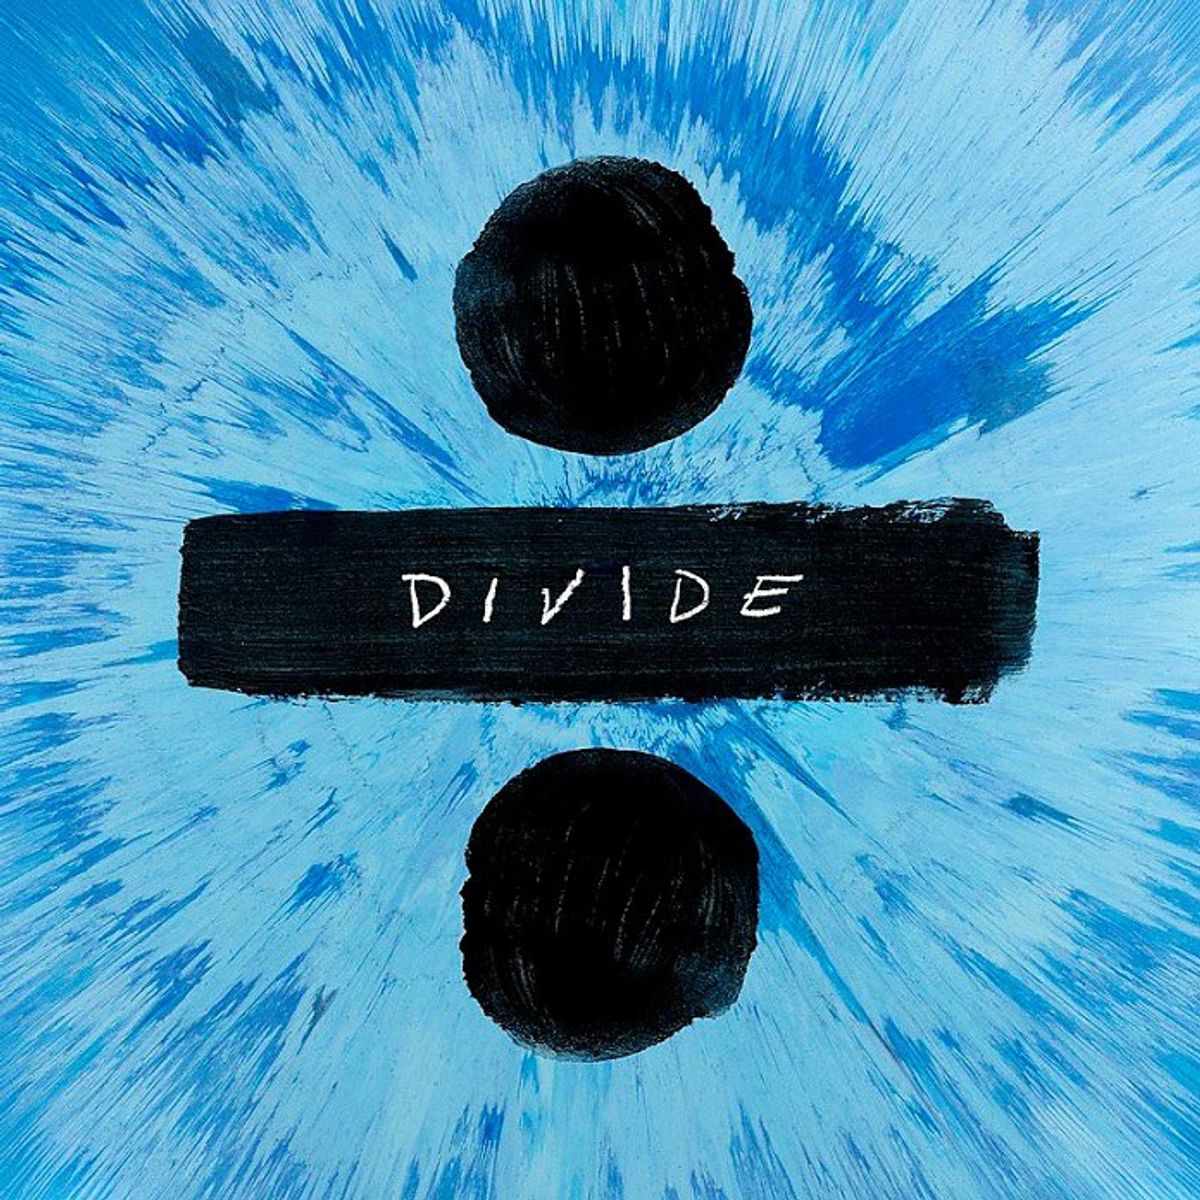 Why I'm "Divide-d" About Ed Sheeran's New Album